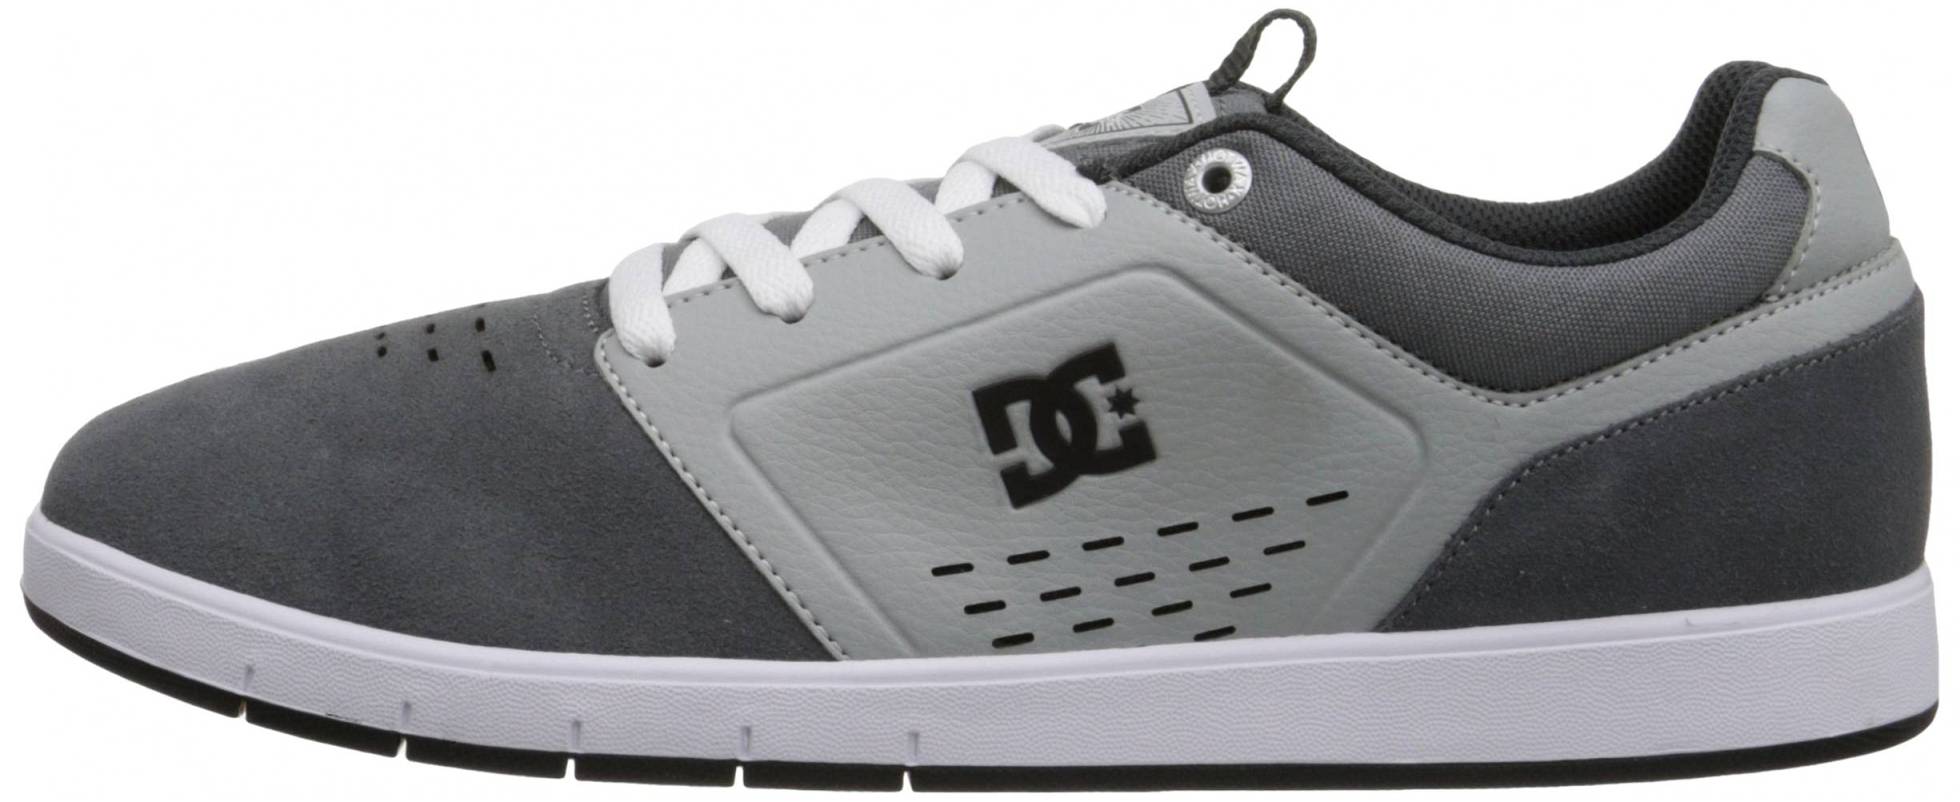 DC Cole Signature Shoe – Shoes Reviews & Reasons To Buy